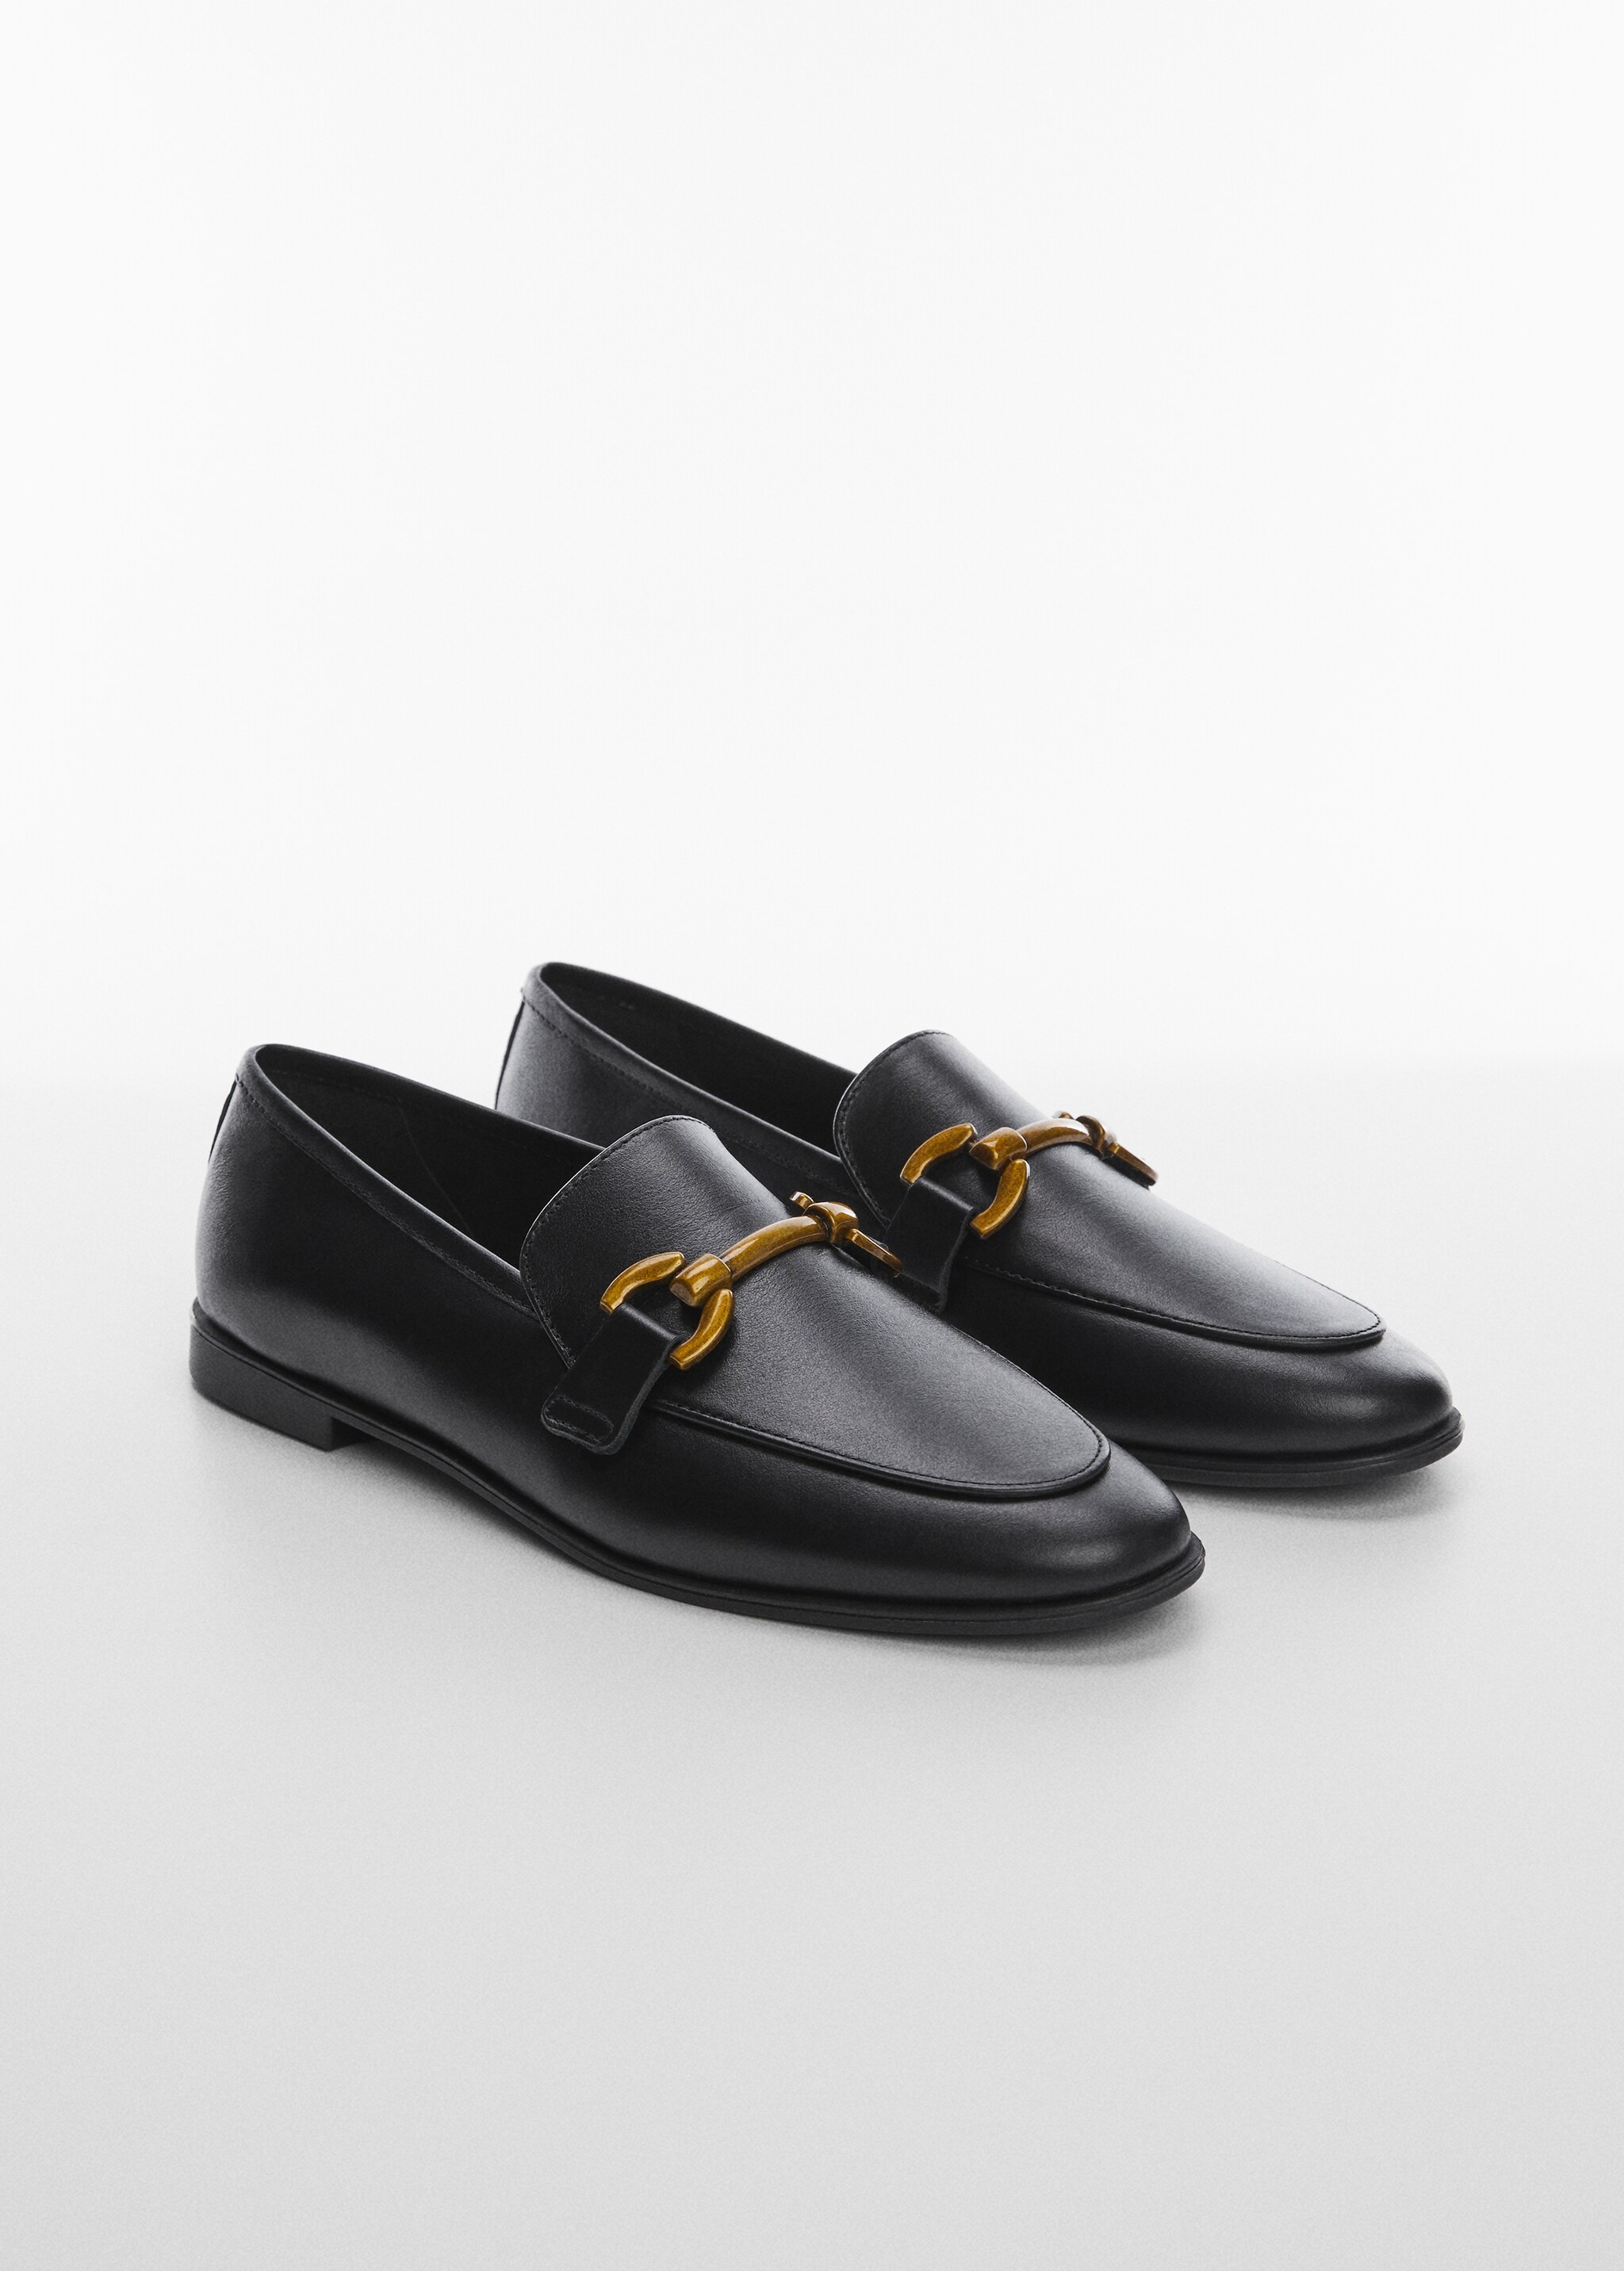 Buckle leather moccasins - General plane